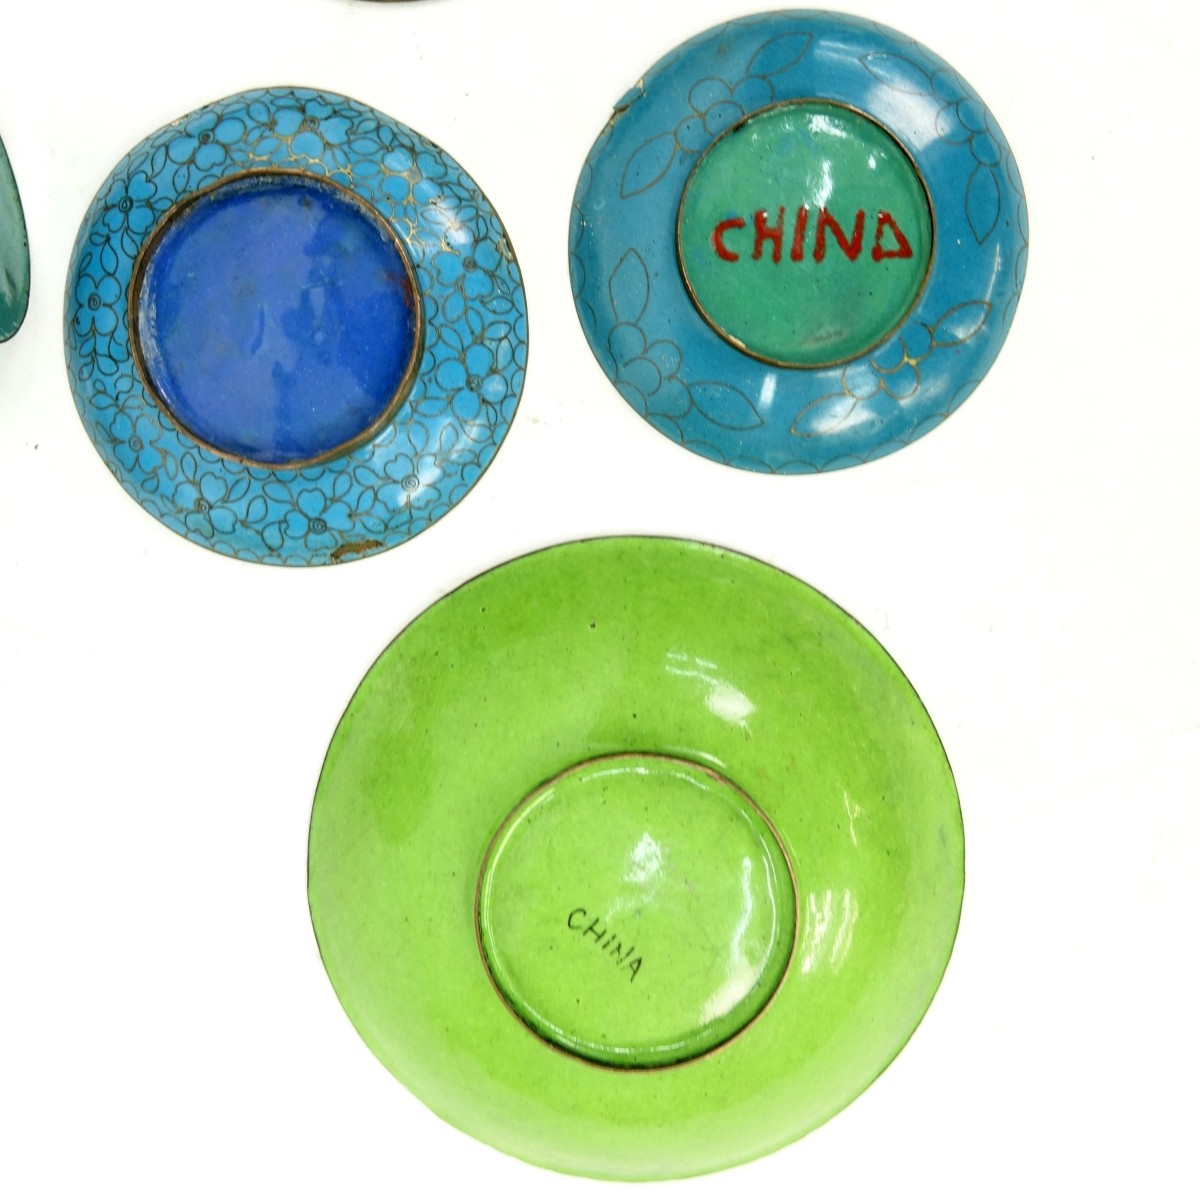 11 pc Chinese Cloisonne Tableware